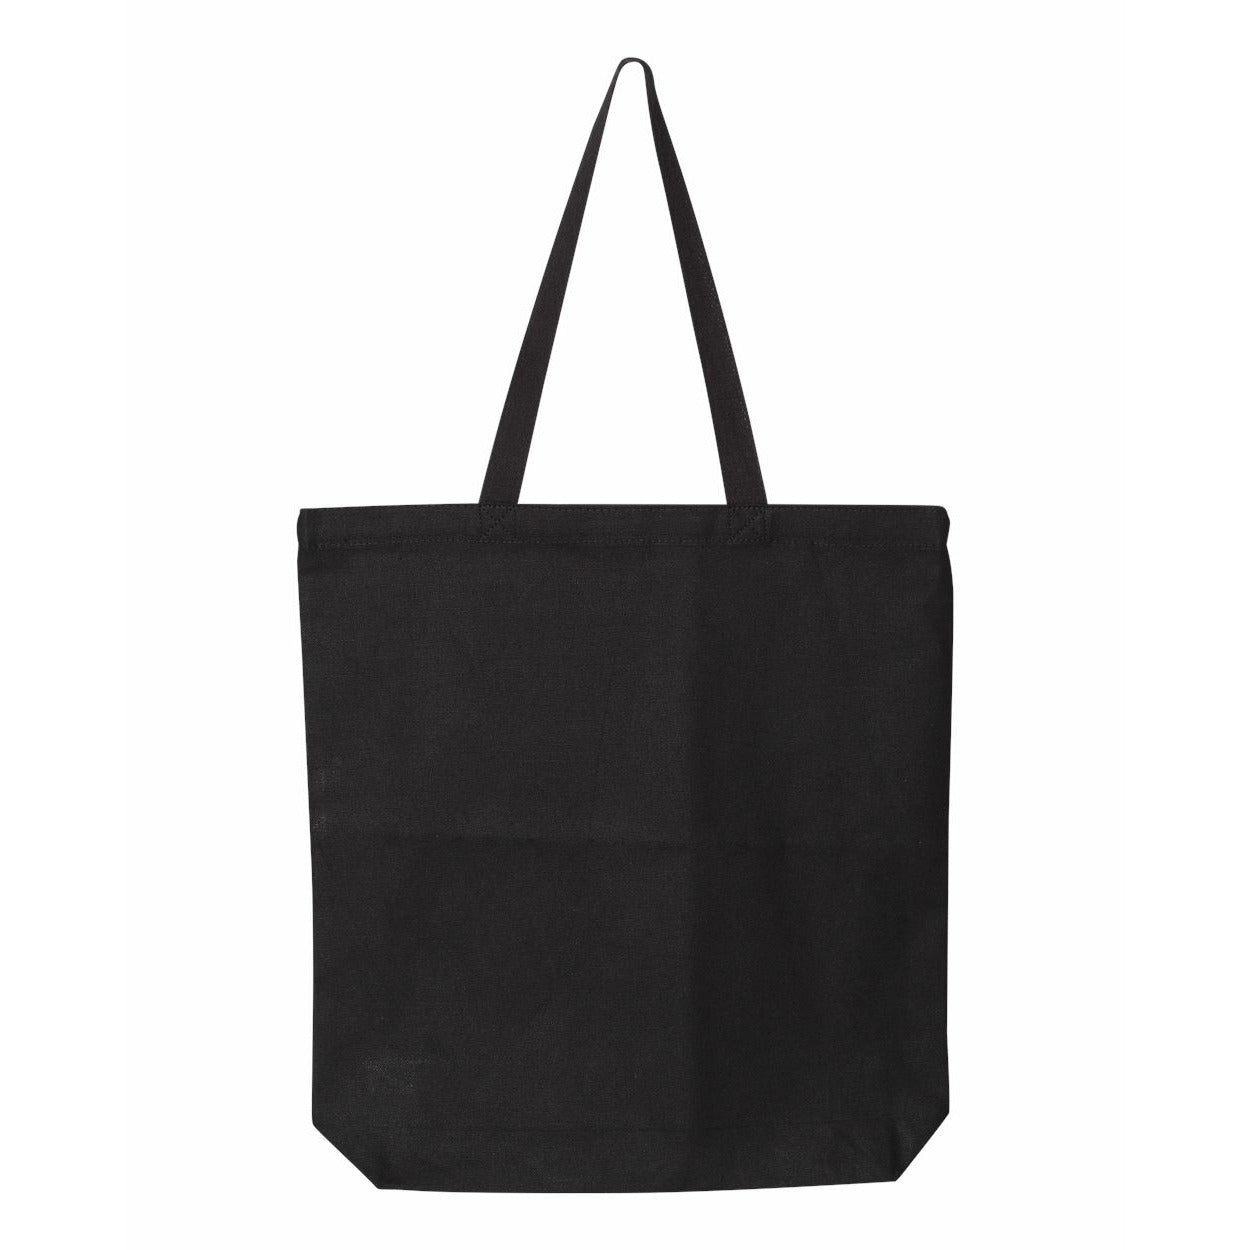 OAD106 | Gusseted Tote Bag